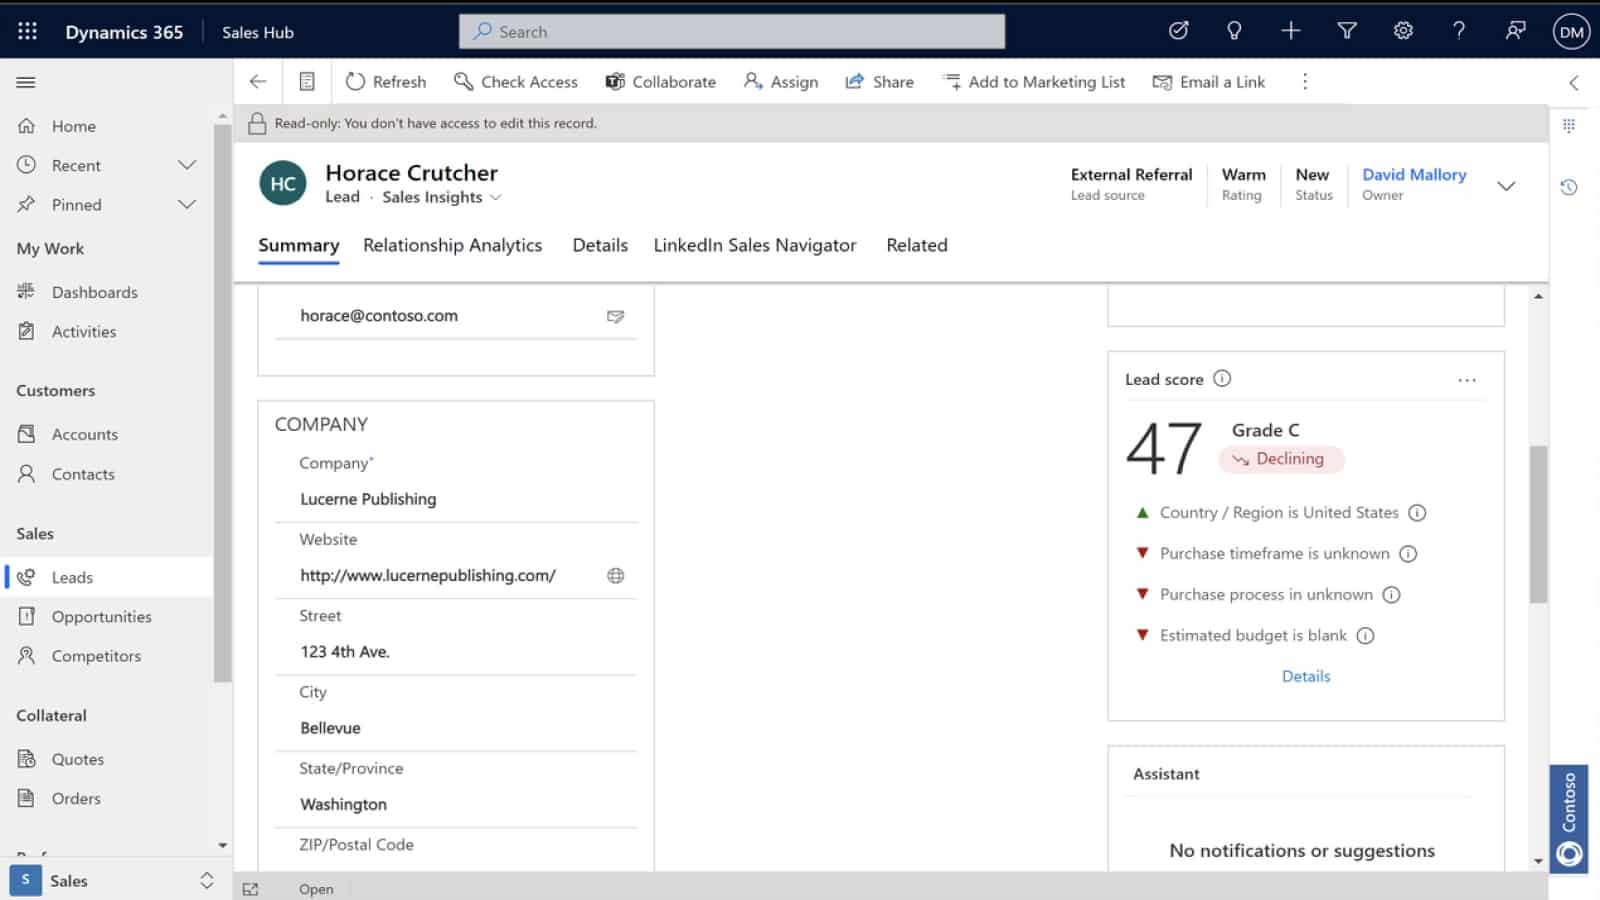 Horace Crutcher profile and sales summary from Microsoft Dynamics 365.